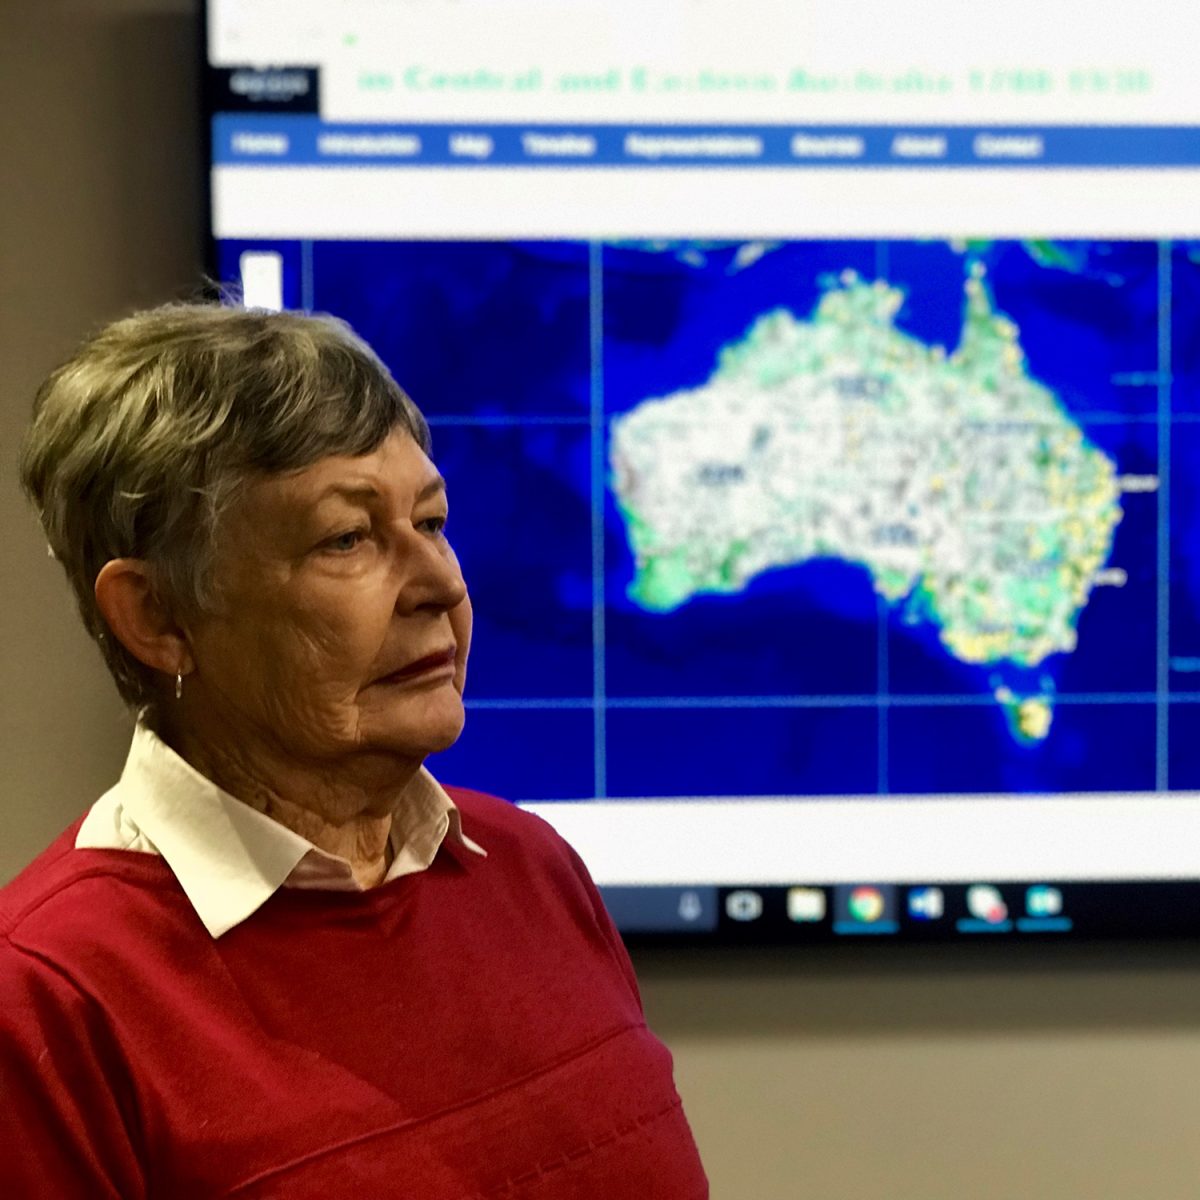 Professor Lyndall Ryan in a red jumper standing in front of a screen with a map of Australia on it.